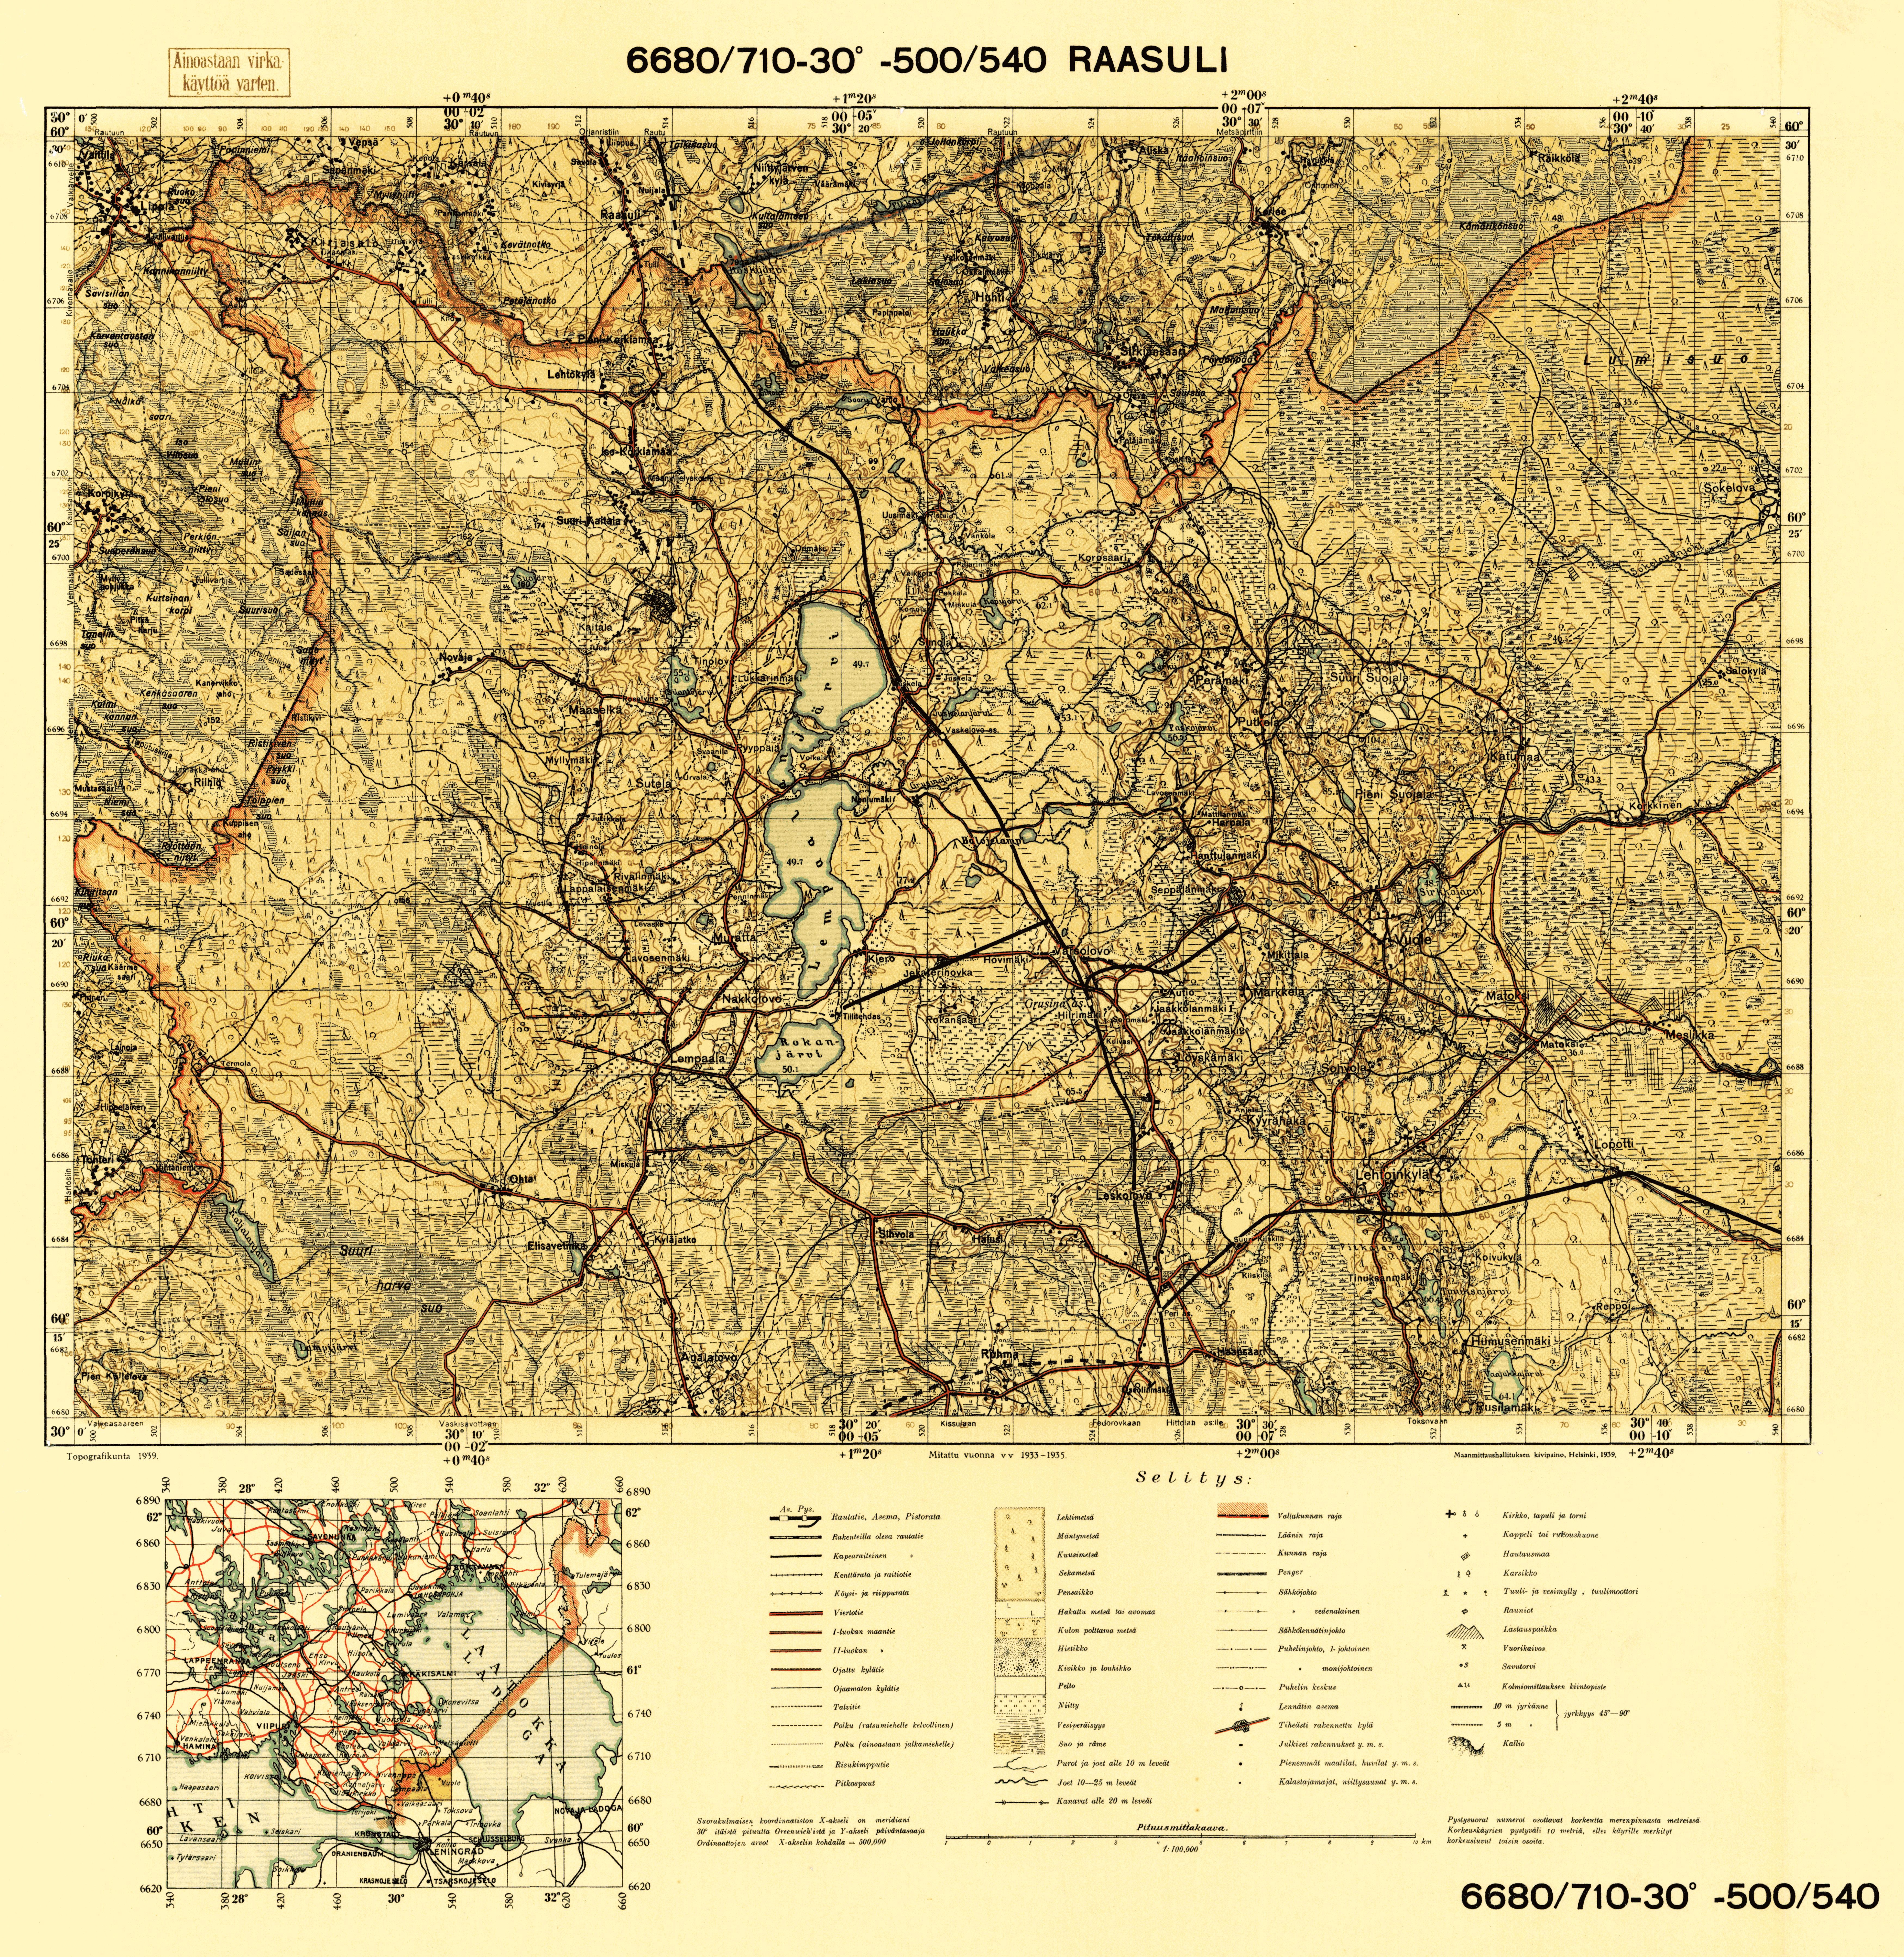 Orehovo. Raasuli. Topografikartta 4041. Topographic map from 1939. Use the zooming tool to explore in higher level of detail. Obtain as a quality print or high resolution image